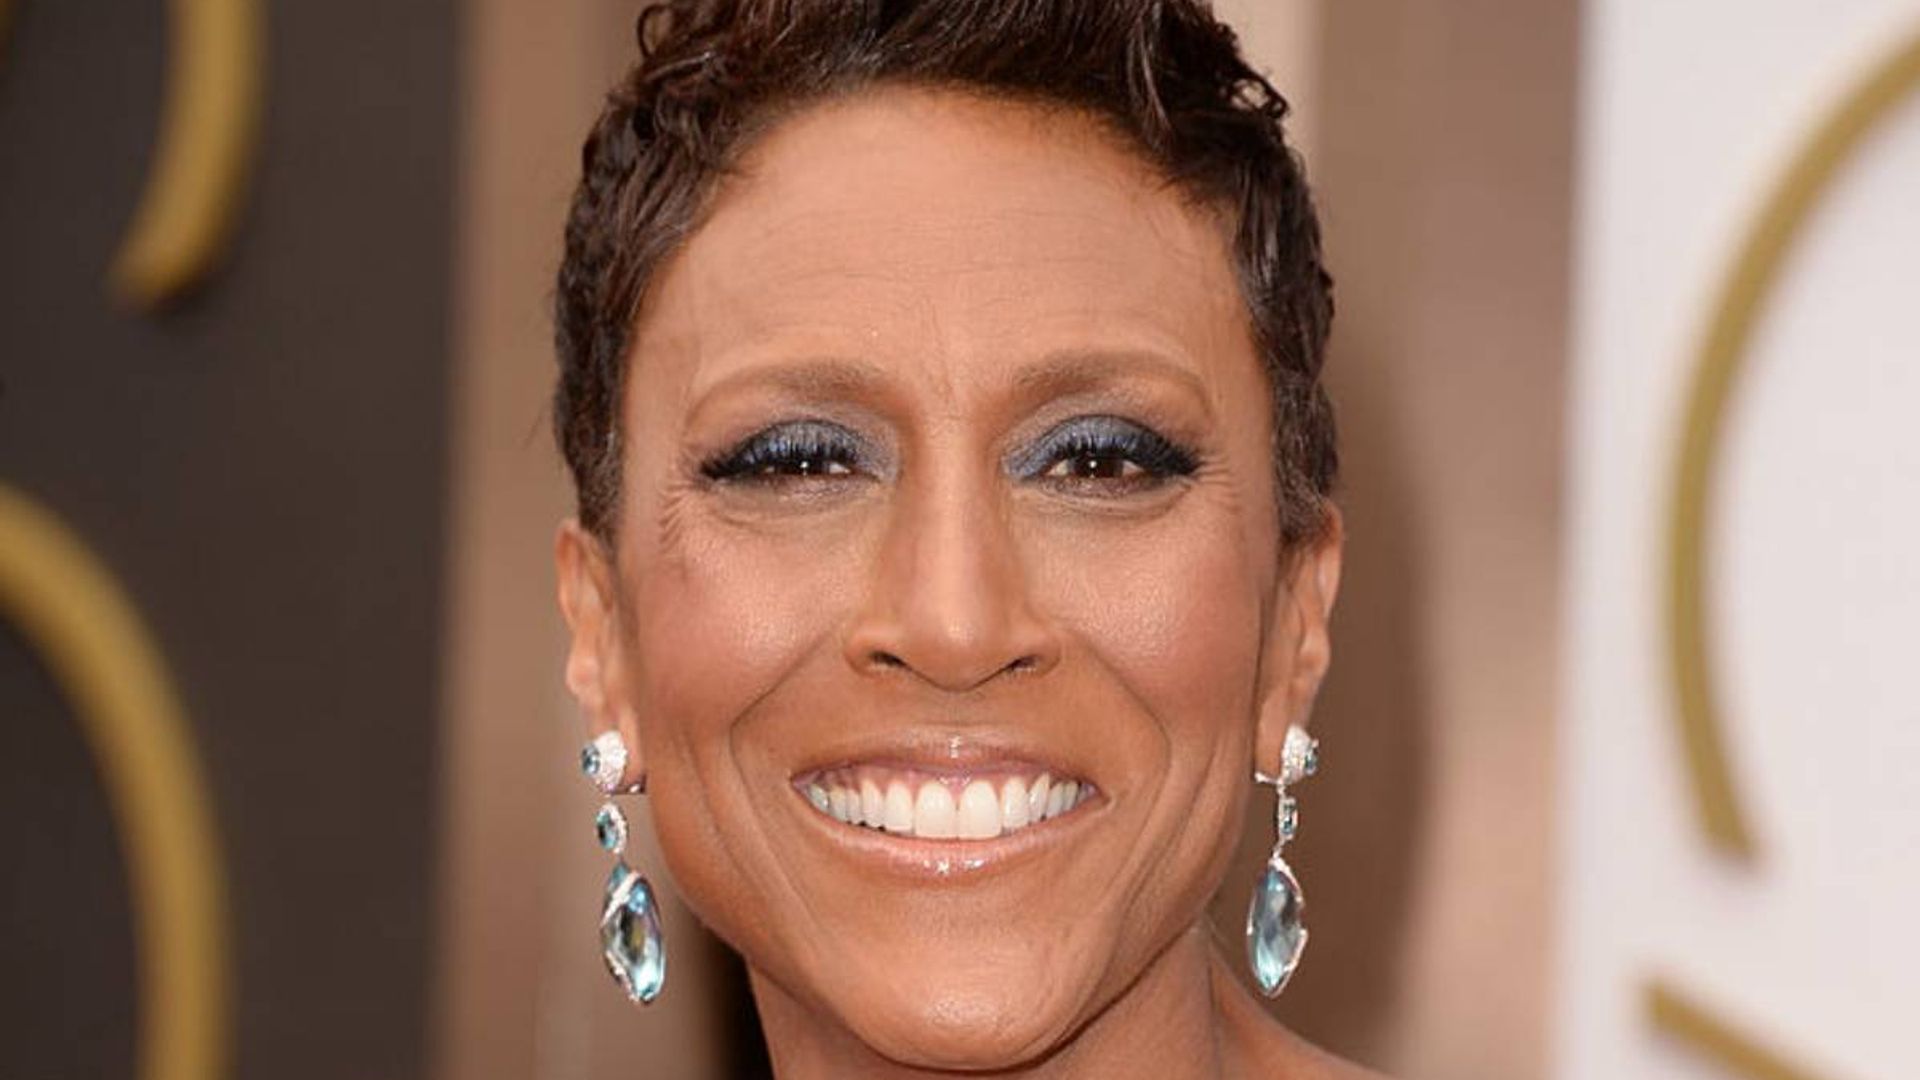 Robin Roberts joined by someone special in never-before-seen photo from sun-drenched getaway with partner Amber Laign